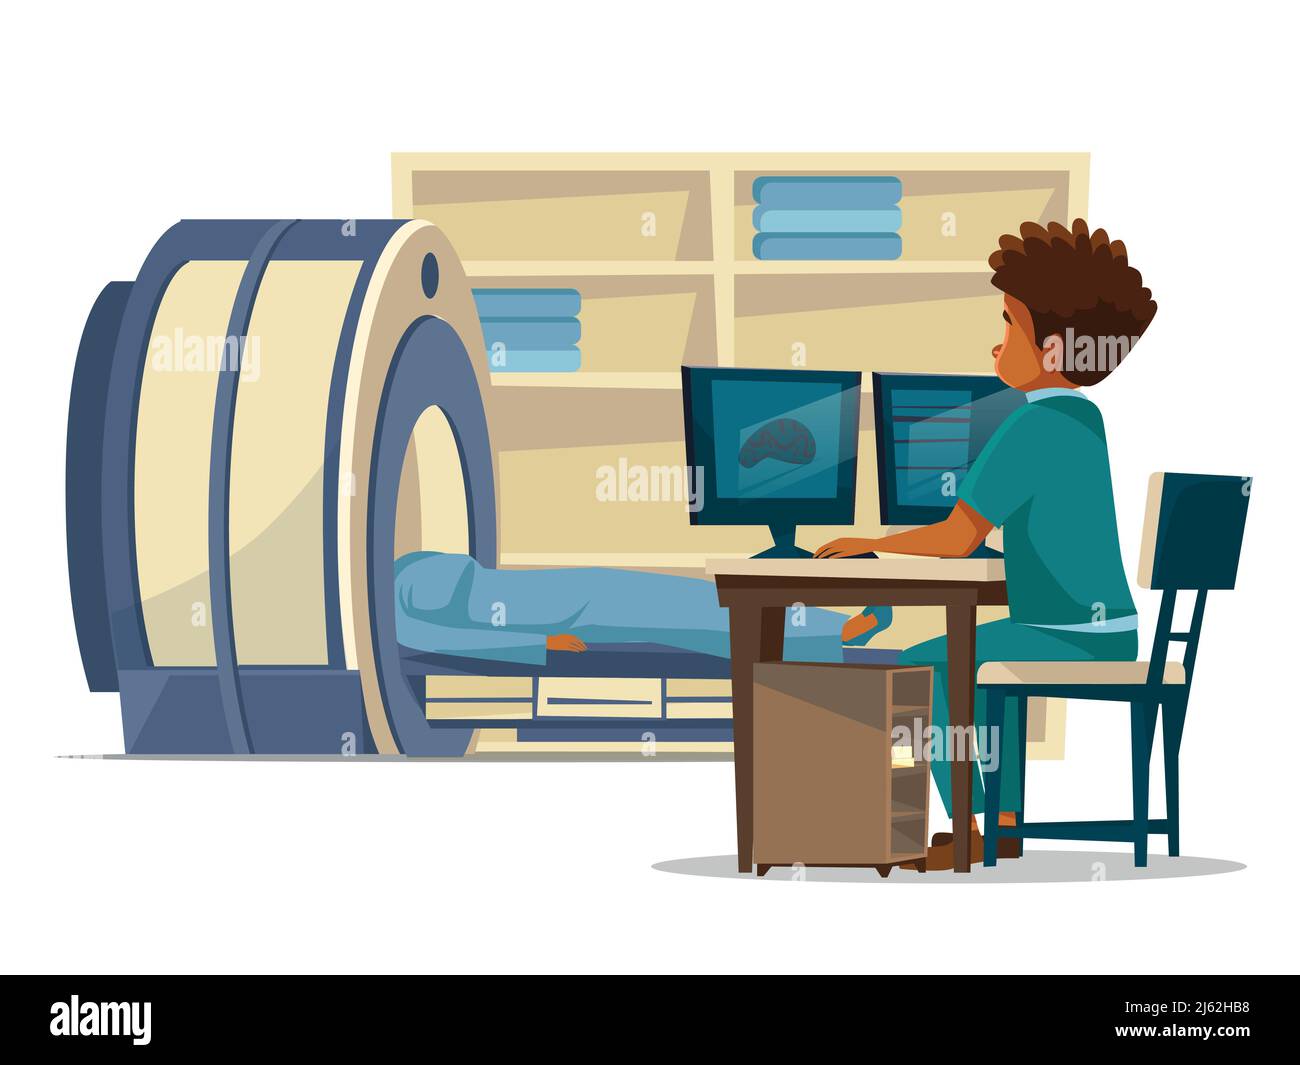 Brain MRI hospital vector cartoon illustration of doctor and patient on medical examination. Flat design of doctor sitting at computer monitor and pat Stock Vector